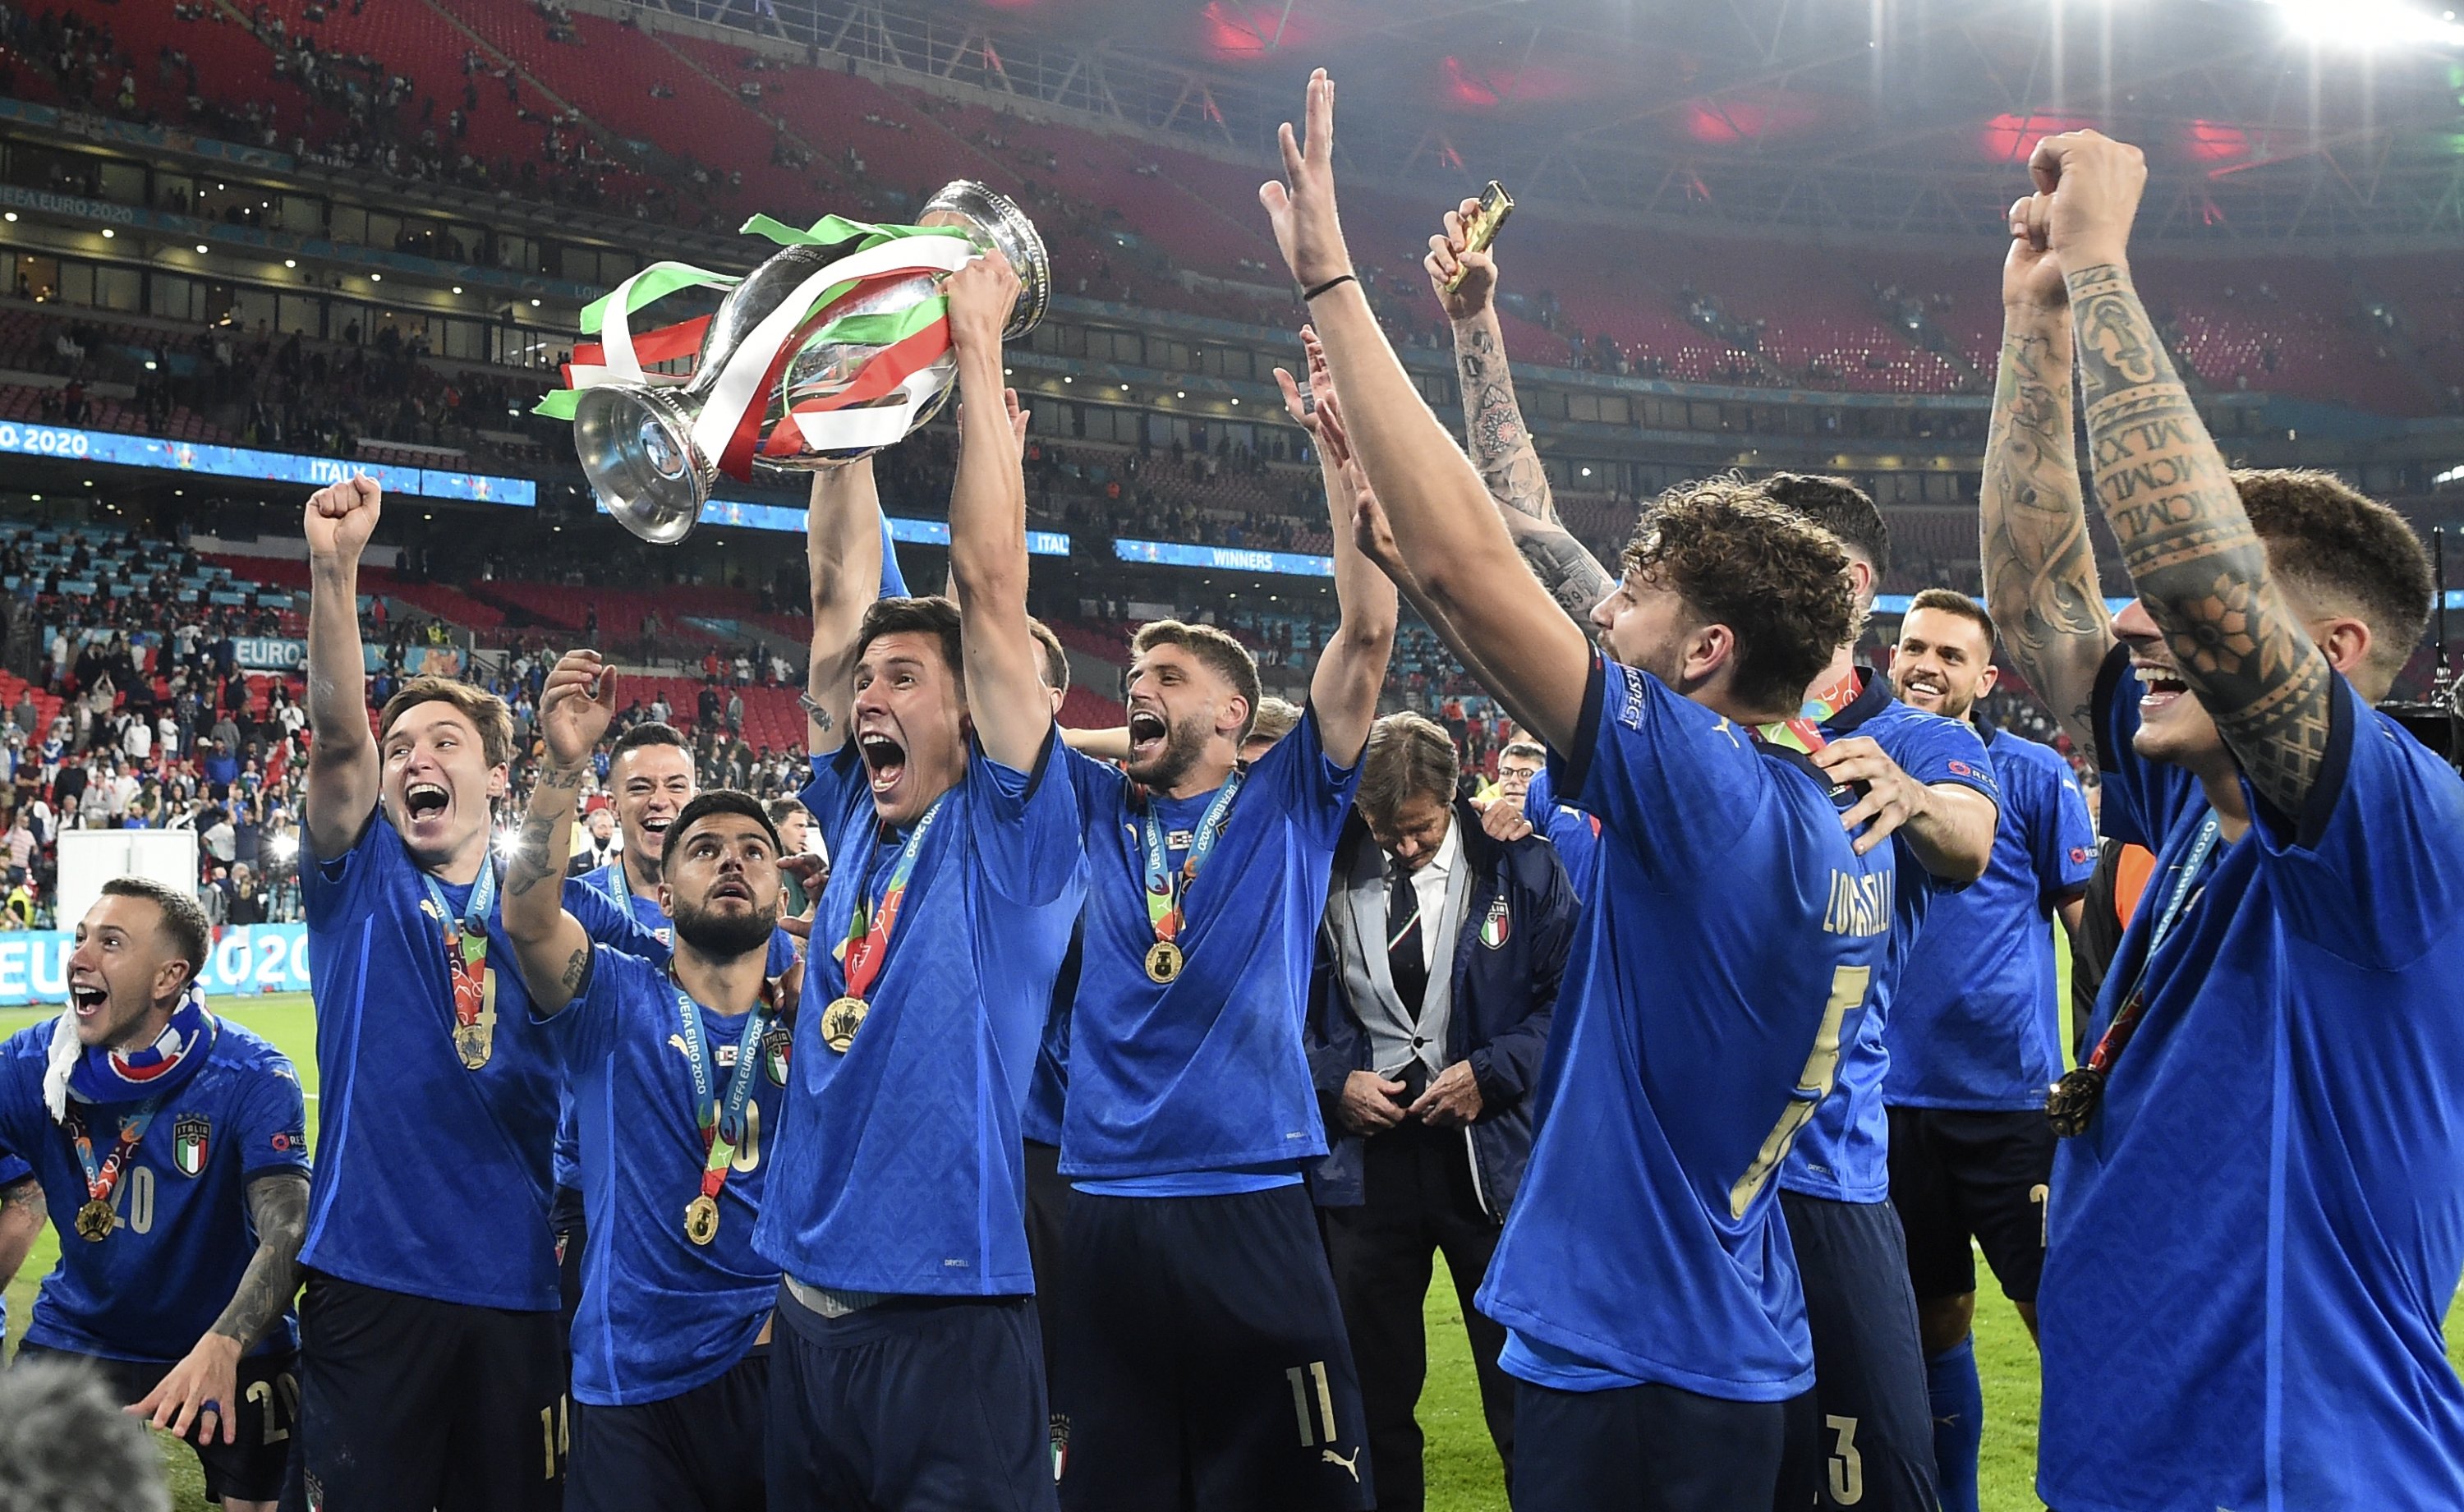 Italian players celebrate with the trophy after the Euro 2020 final match against England at Wembley stadium in London, England, July 11, 2021. (AP Photo)